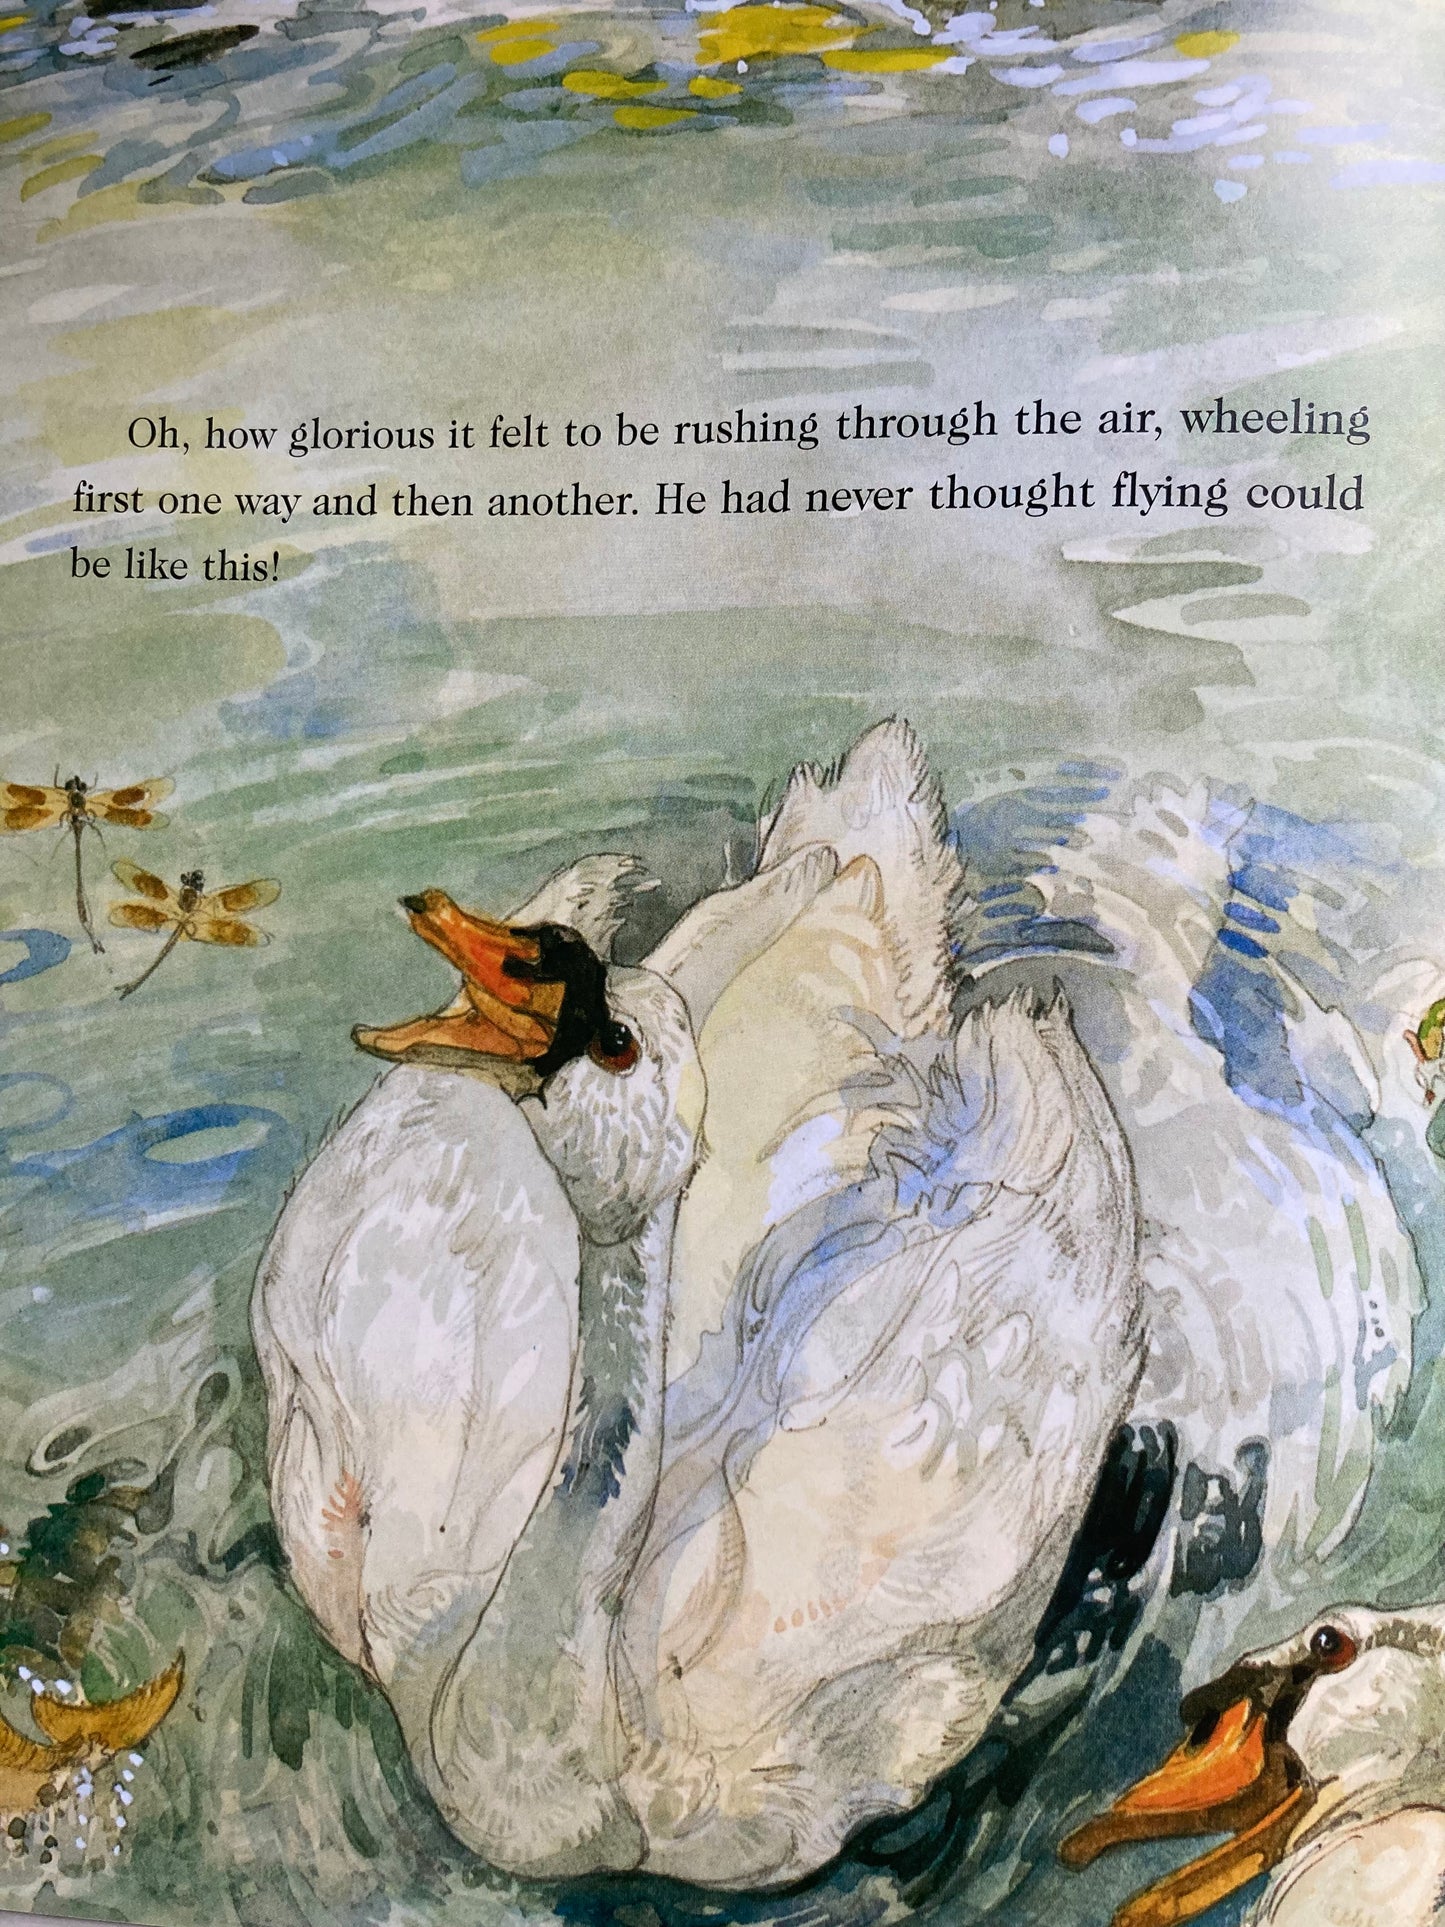 Children’s Fairy Tale Book - THE UGLY DUCKLING